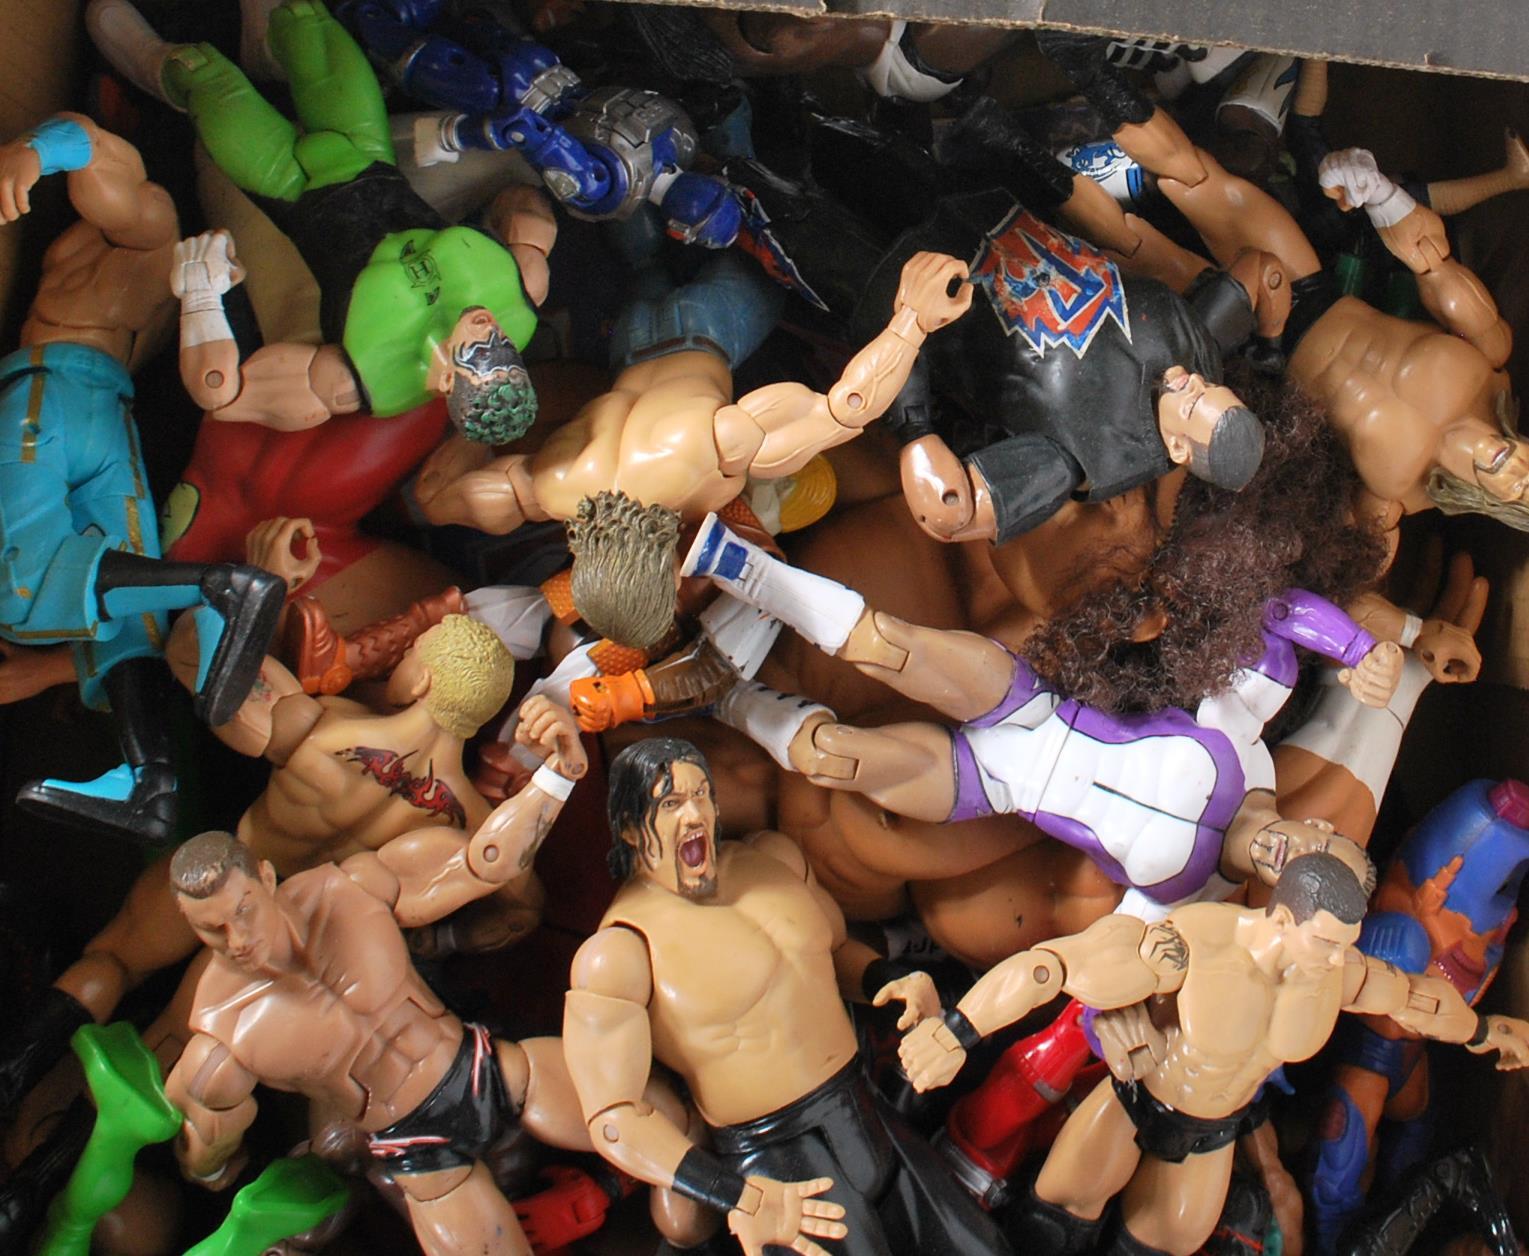 A COLLECTION OF WWE / WWF / ECW ACTION FIGURES BY JAKKS PACIFIC - Image 2 of 5